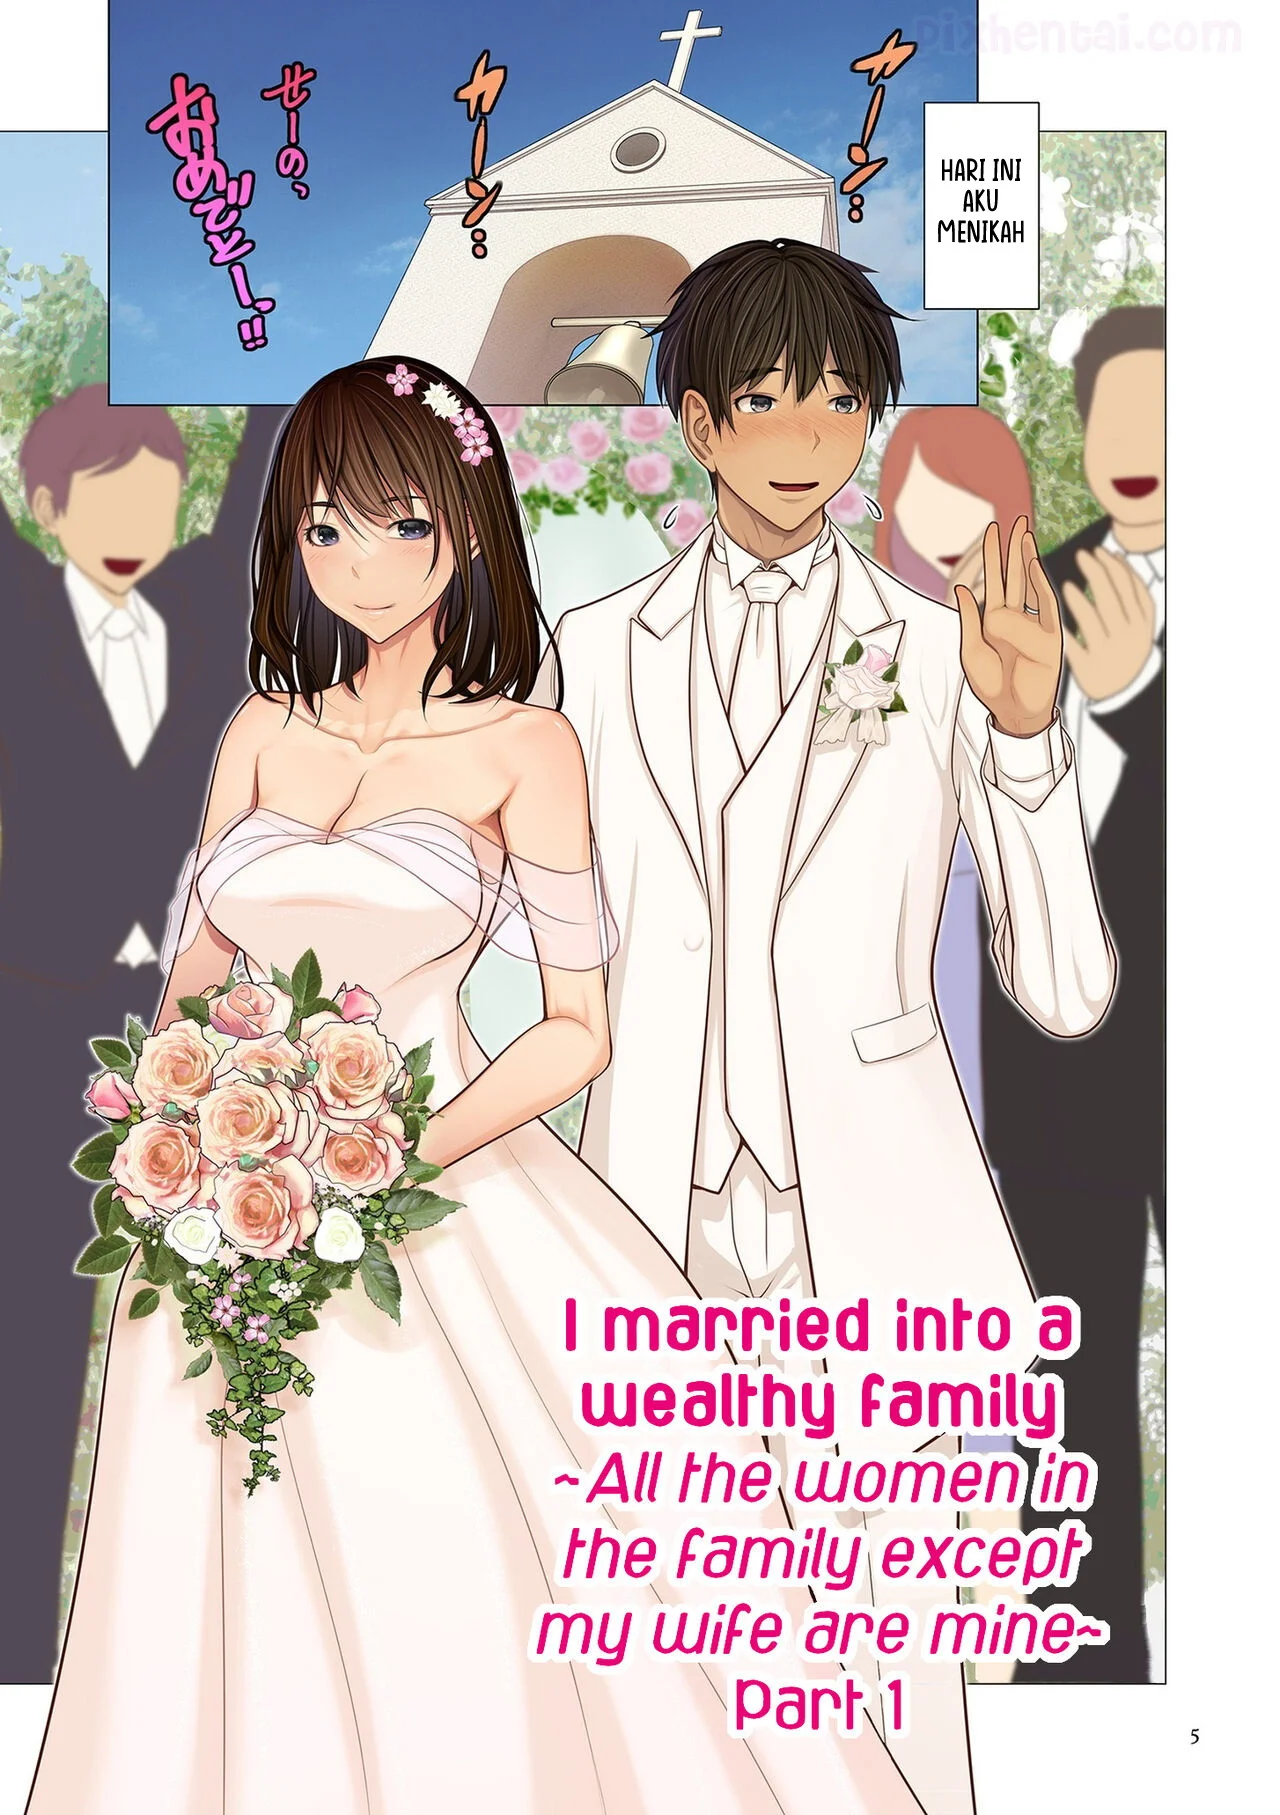 Komik hentai xxx manga sex bokep I married into a wealthy family All the women in the family except my wife are mine part 1 1